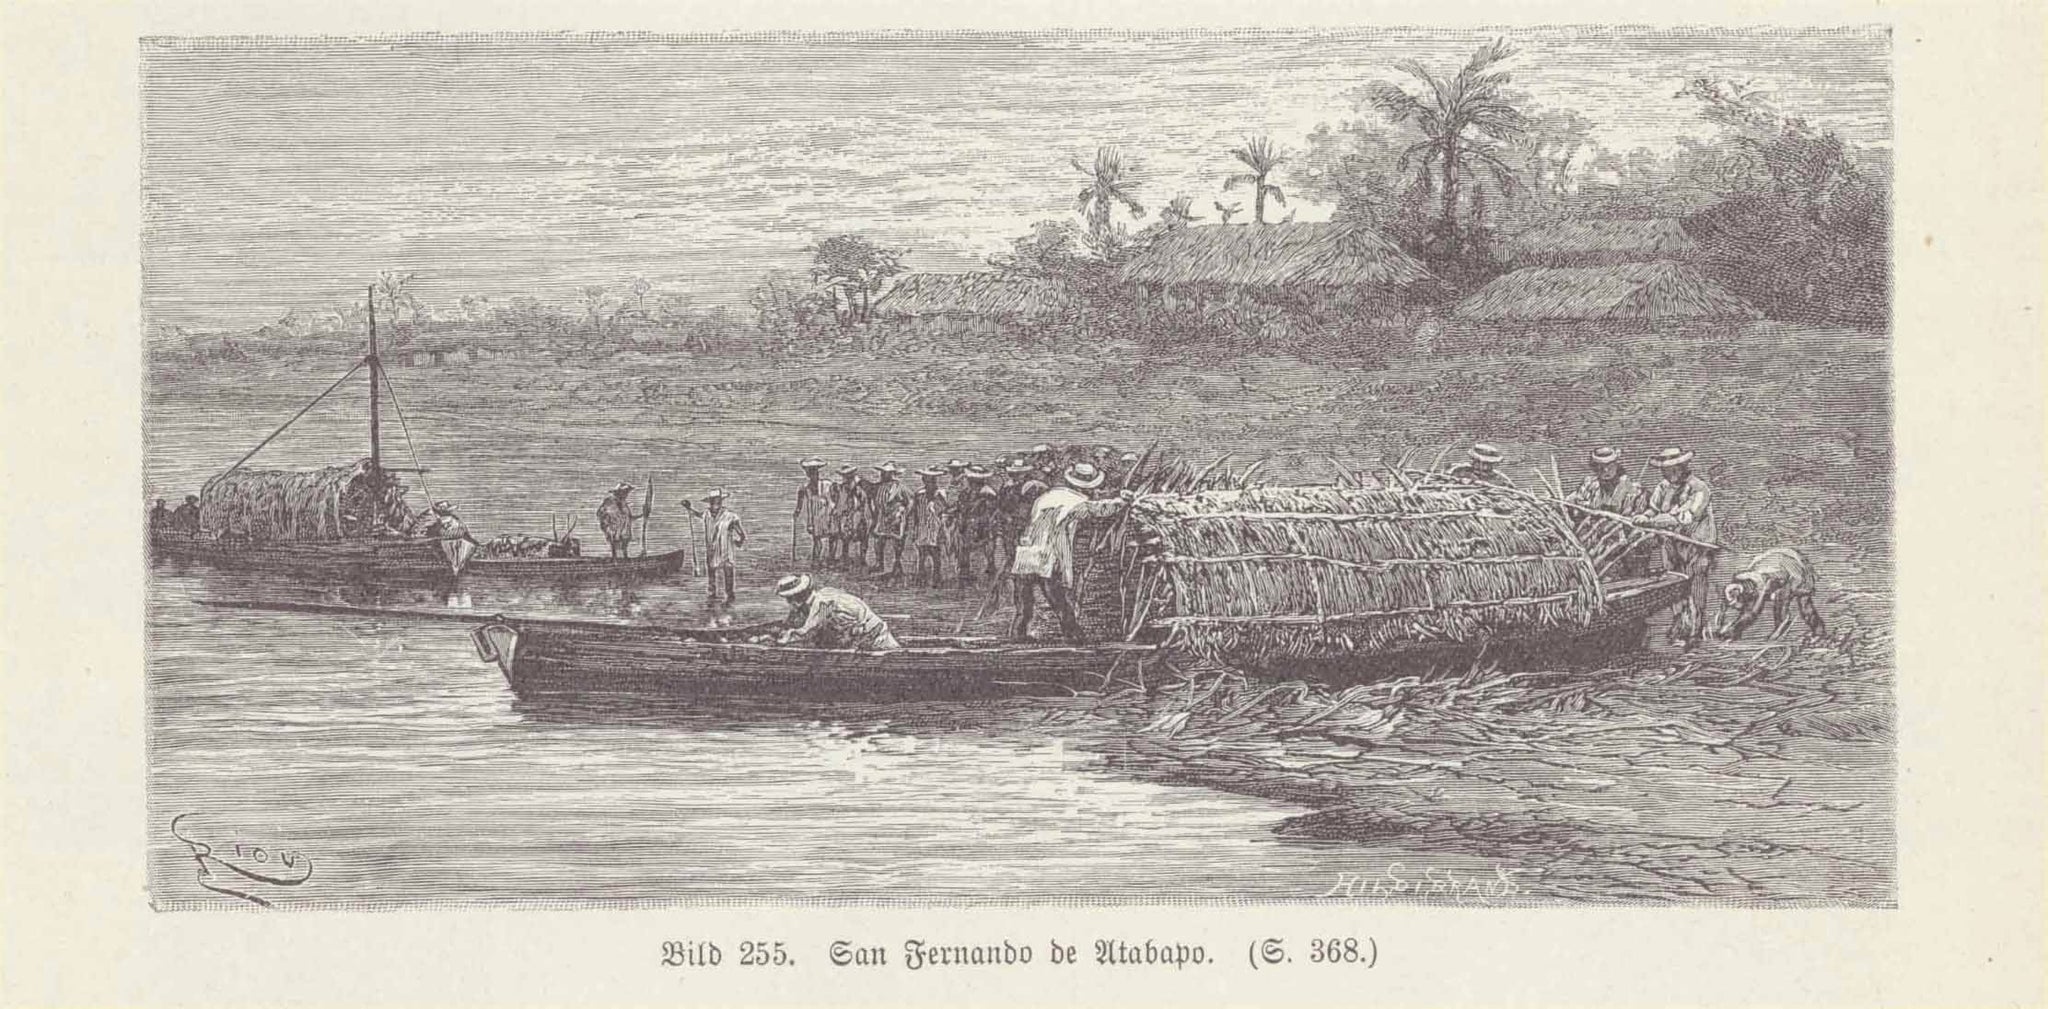 "San Fernando de Atabapo" (Venezuela)  Wood engraving on a page of text about early exploration on the Orinoco River.  Original antique print    On the reverse side is an image of the Orinoco by Caicara. Published 1895.